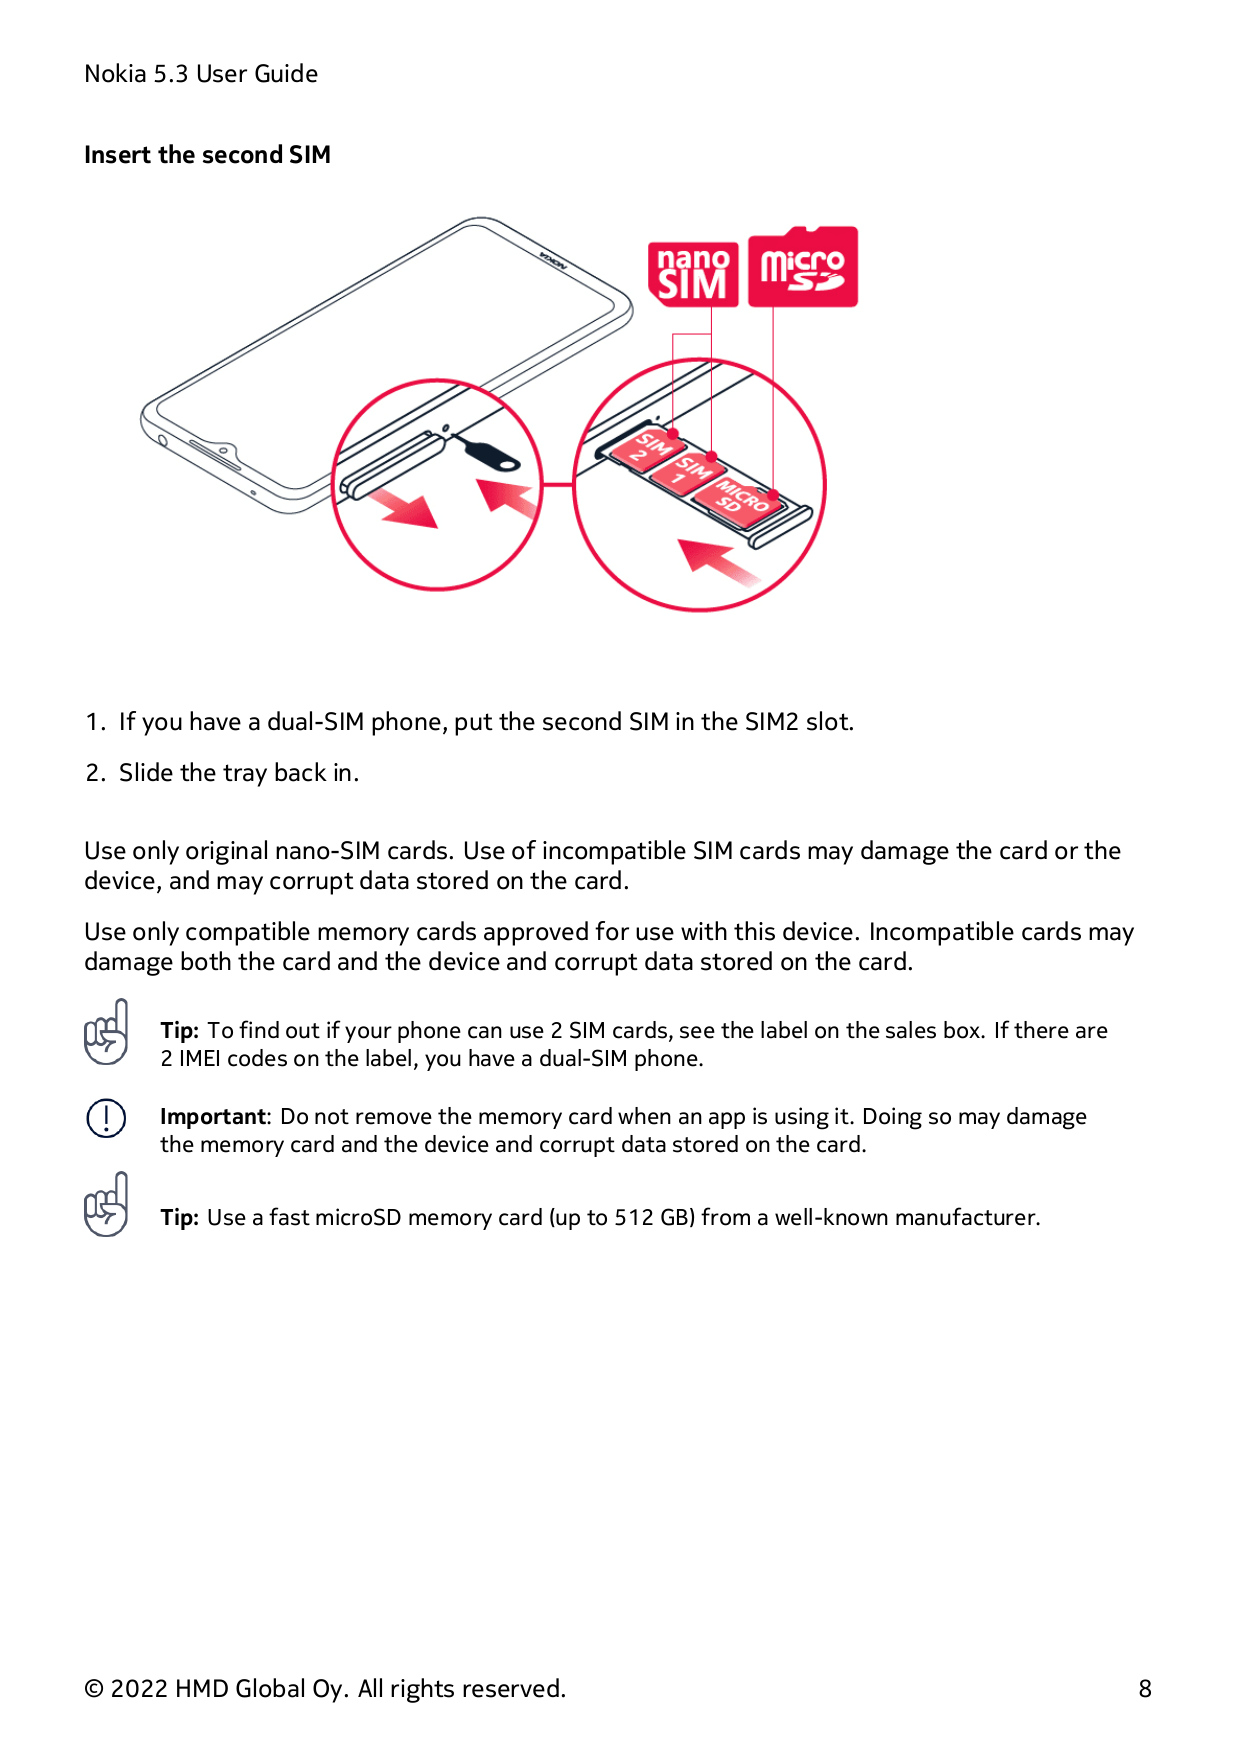 Nokia 5.3 User GuideInsert the second SIM1. If you have a dual-SIM phone, put the second SIM in the SIM2 slot.2. Slide the tray 